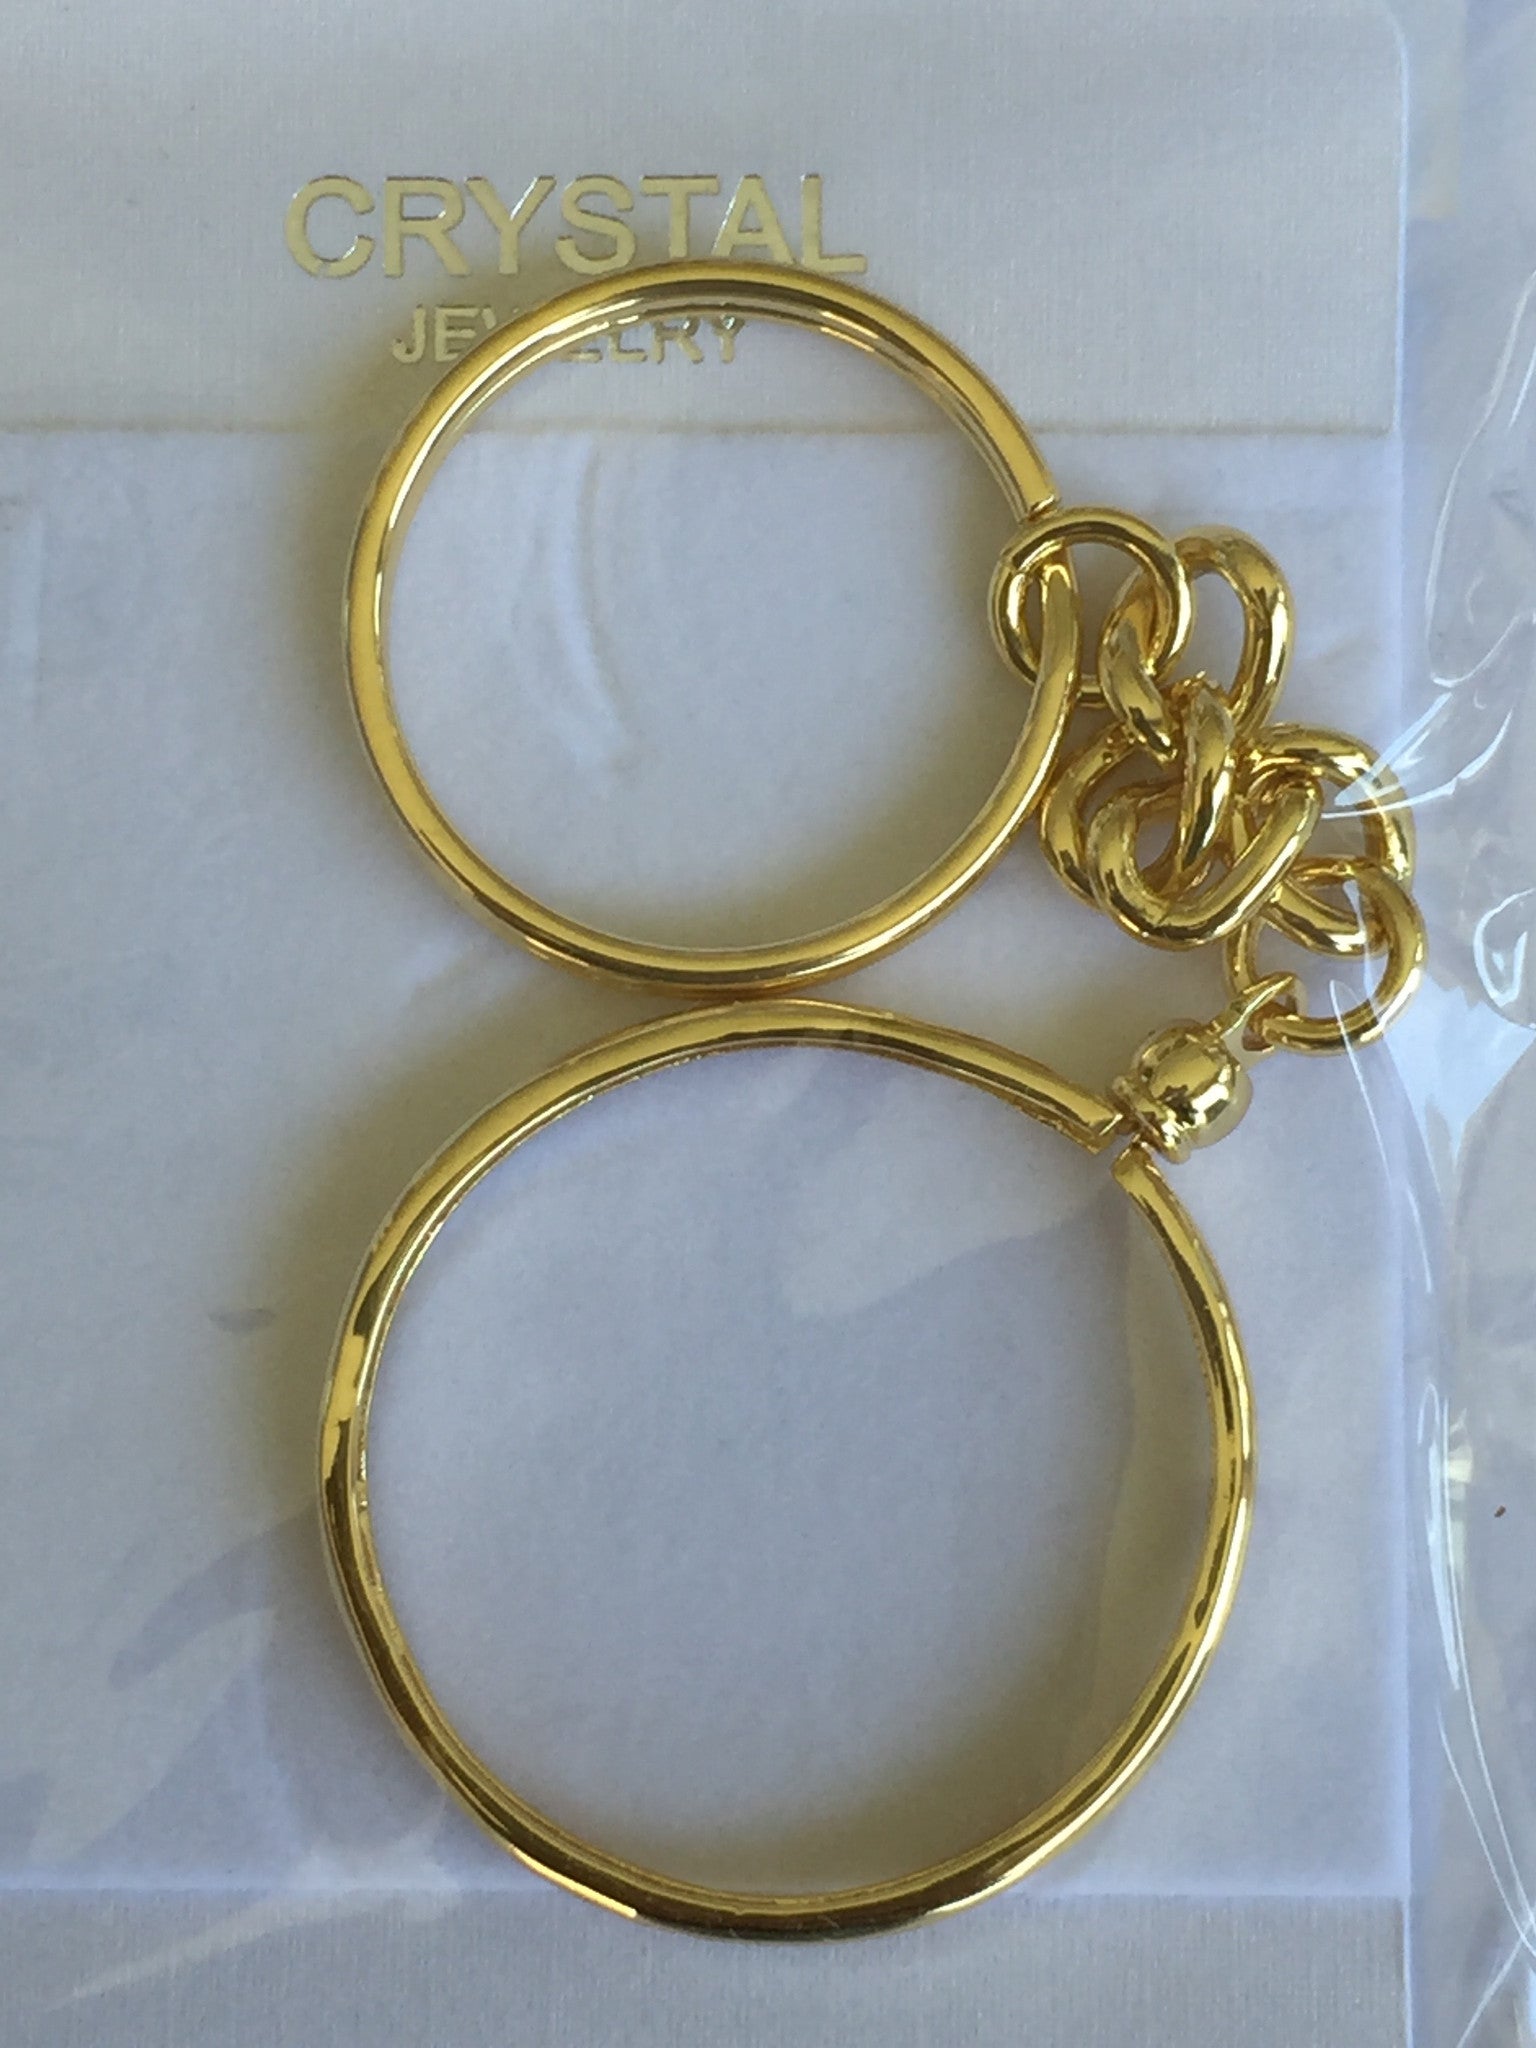 Bezel Medallion Holder Key Chain Gold Plated Accessories